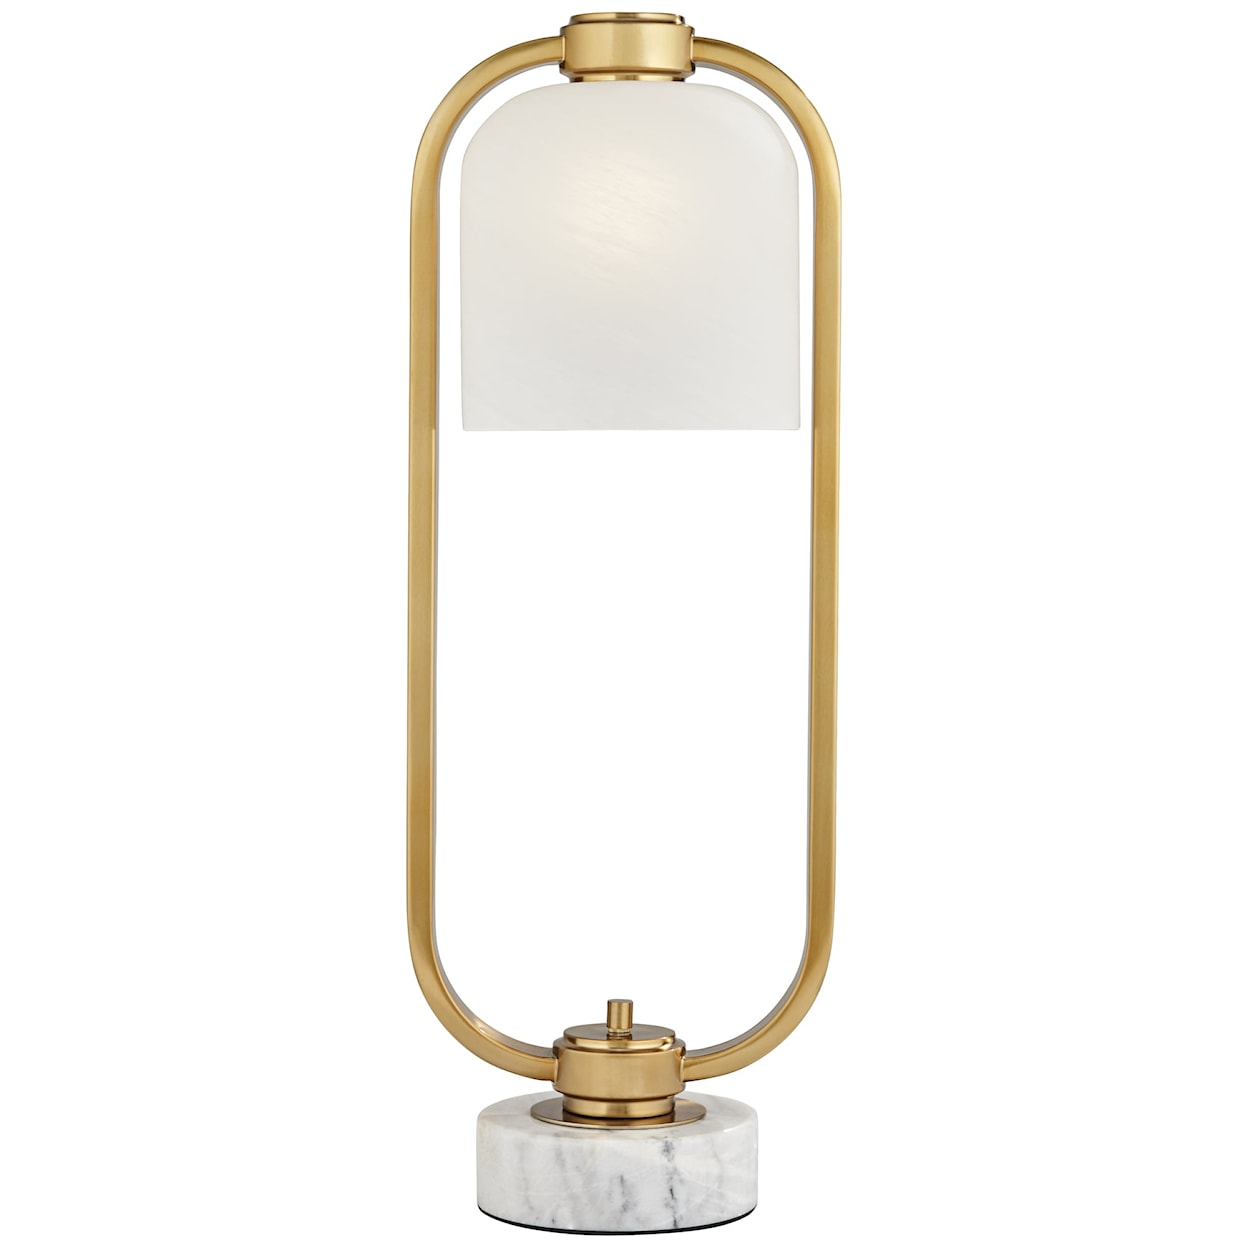 Pacific Coast Lighting Pacific Coast Lighting TL-Oval metal and marble w/glass shade